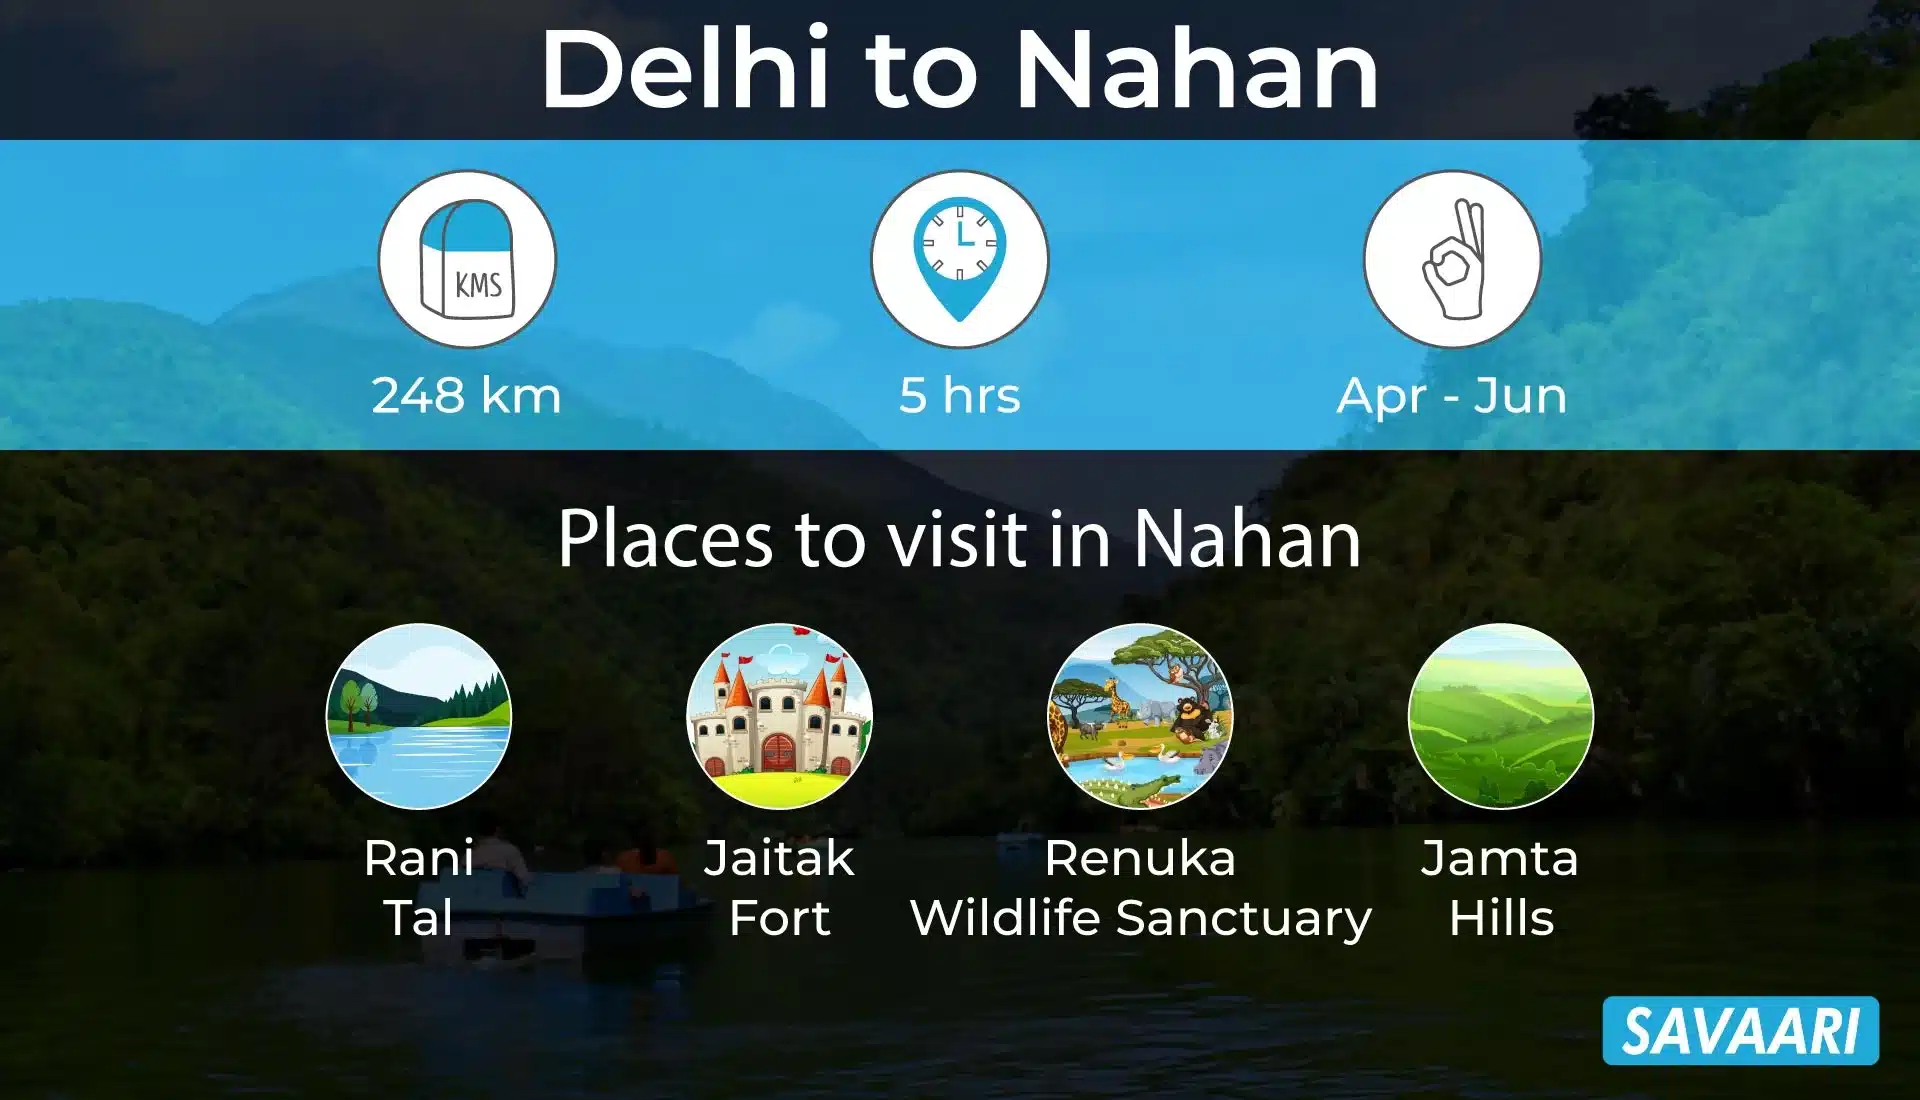 Delhi to Nahan by road